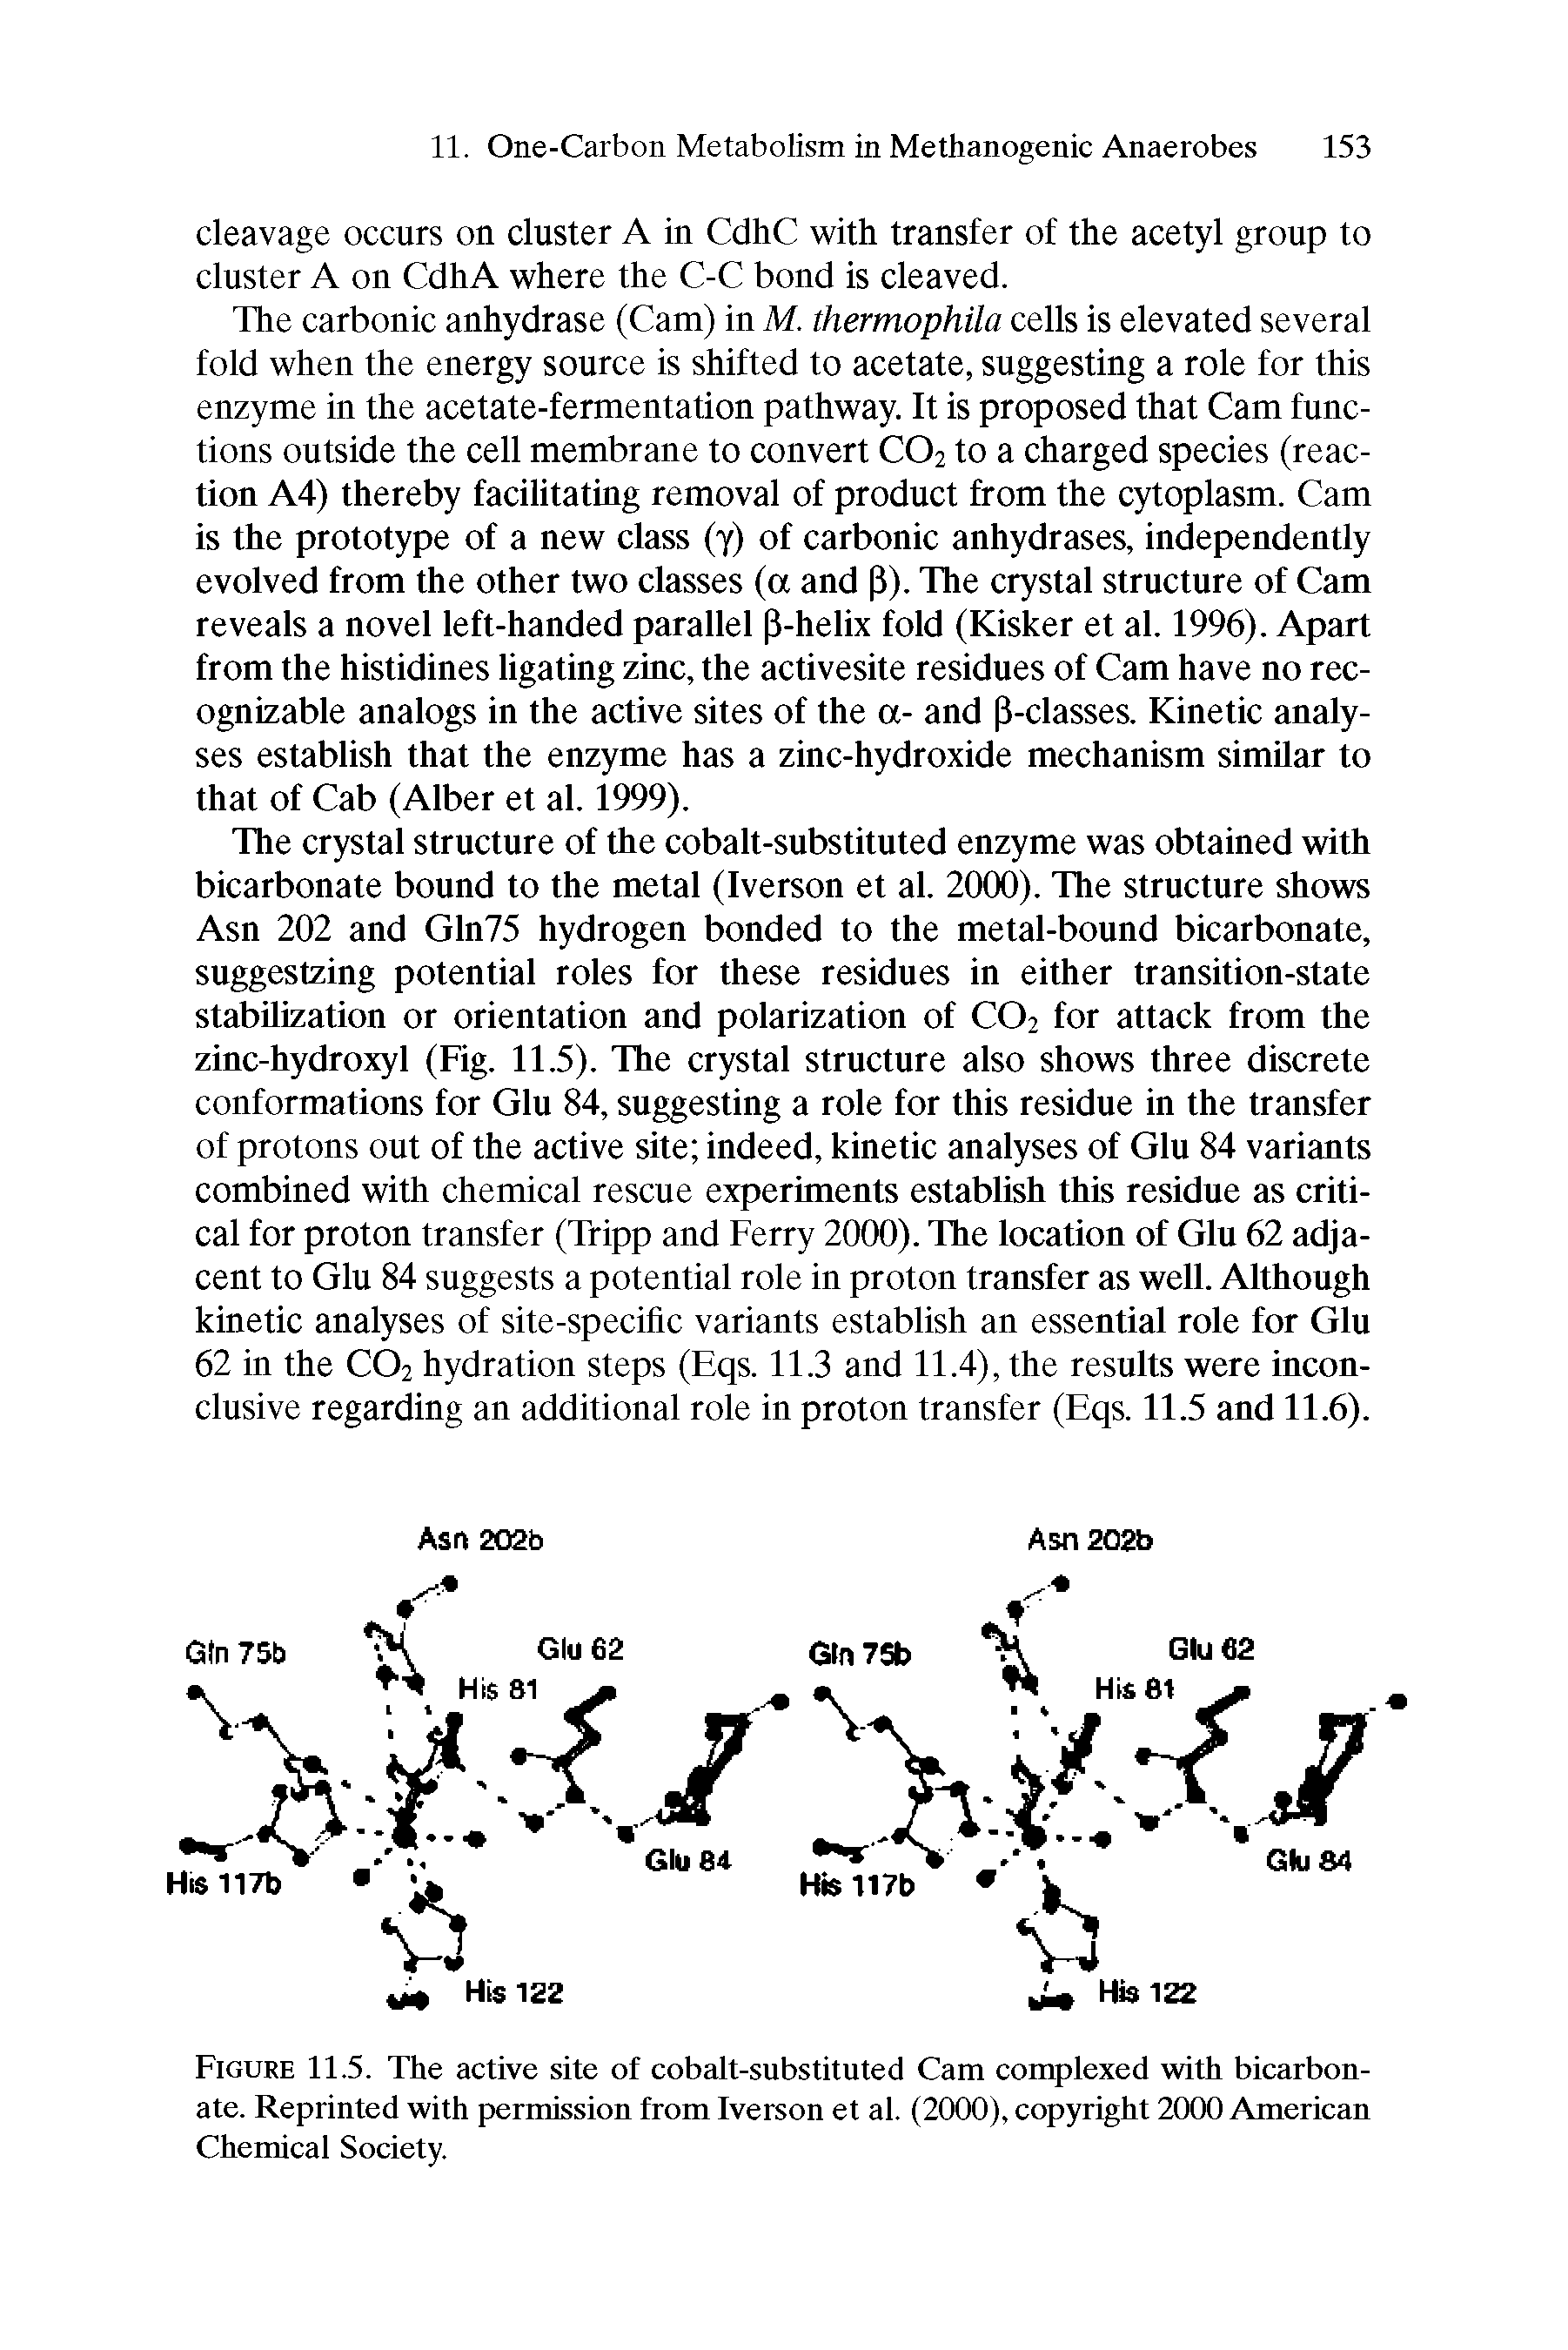 Figure 11.5. The active site of cobalt-substituted Cam complexed with bicarbonate. Reprinted with permission from Iverson et al. (2000), copyright 2000 American Chemical Society.